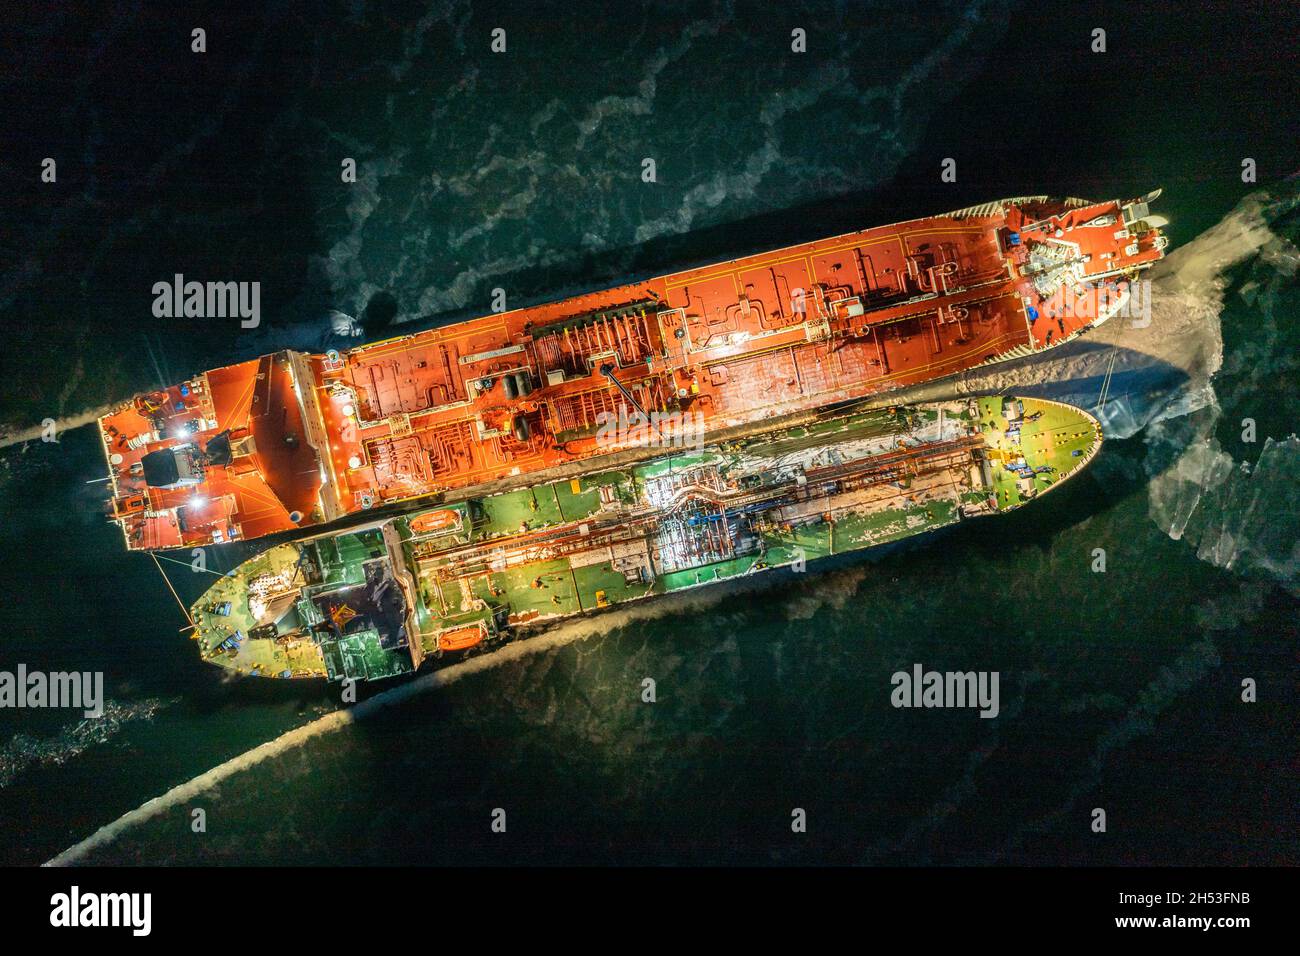 https://c8.alamy.com/comp/2H53FNB/two-tankers-at-night-stand-nearby-in-young-ice-shooting-from-air-2H53FNB.jpg